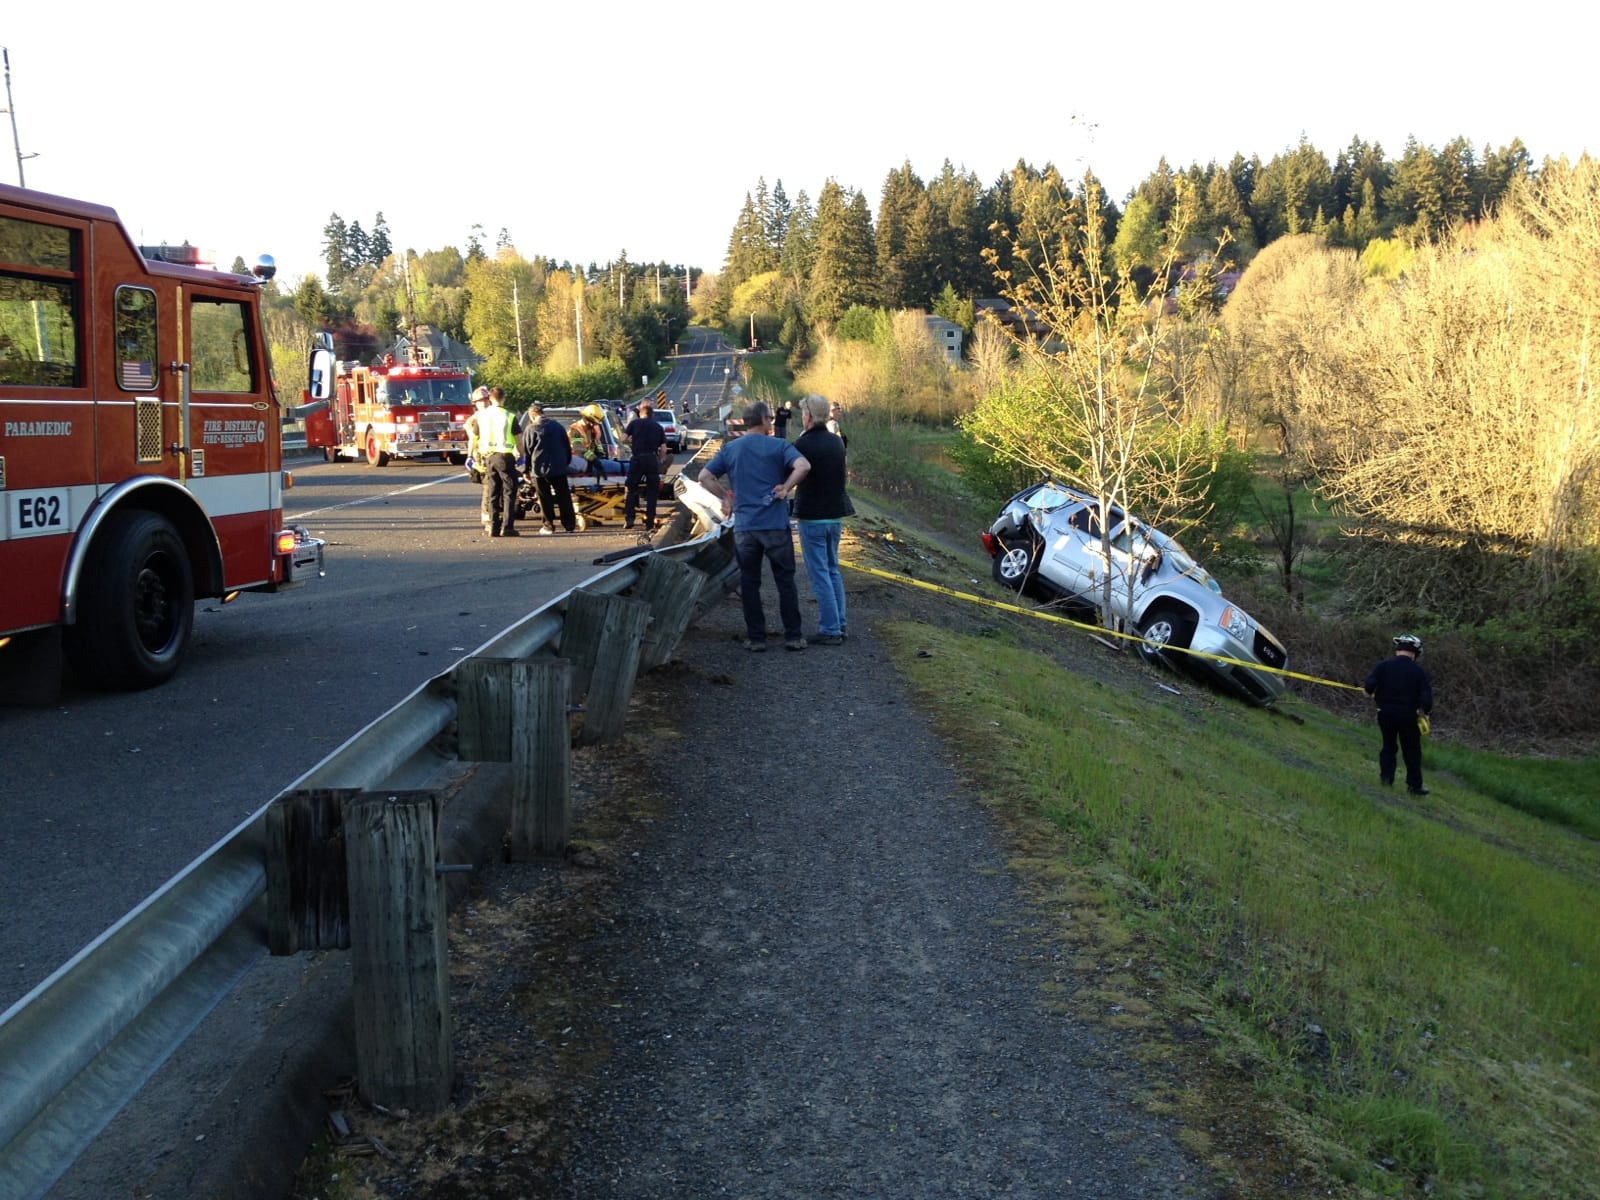 A vehicle crash on Sunday in Felida sent this SUV over a guardrail and caused the SUV to roll once before it landed on its wheels near the Salmon Creek Trail.